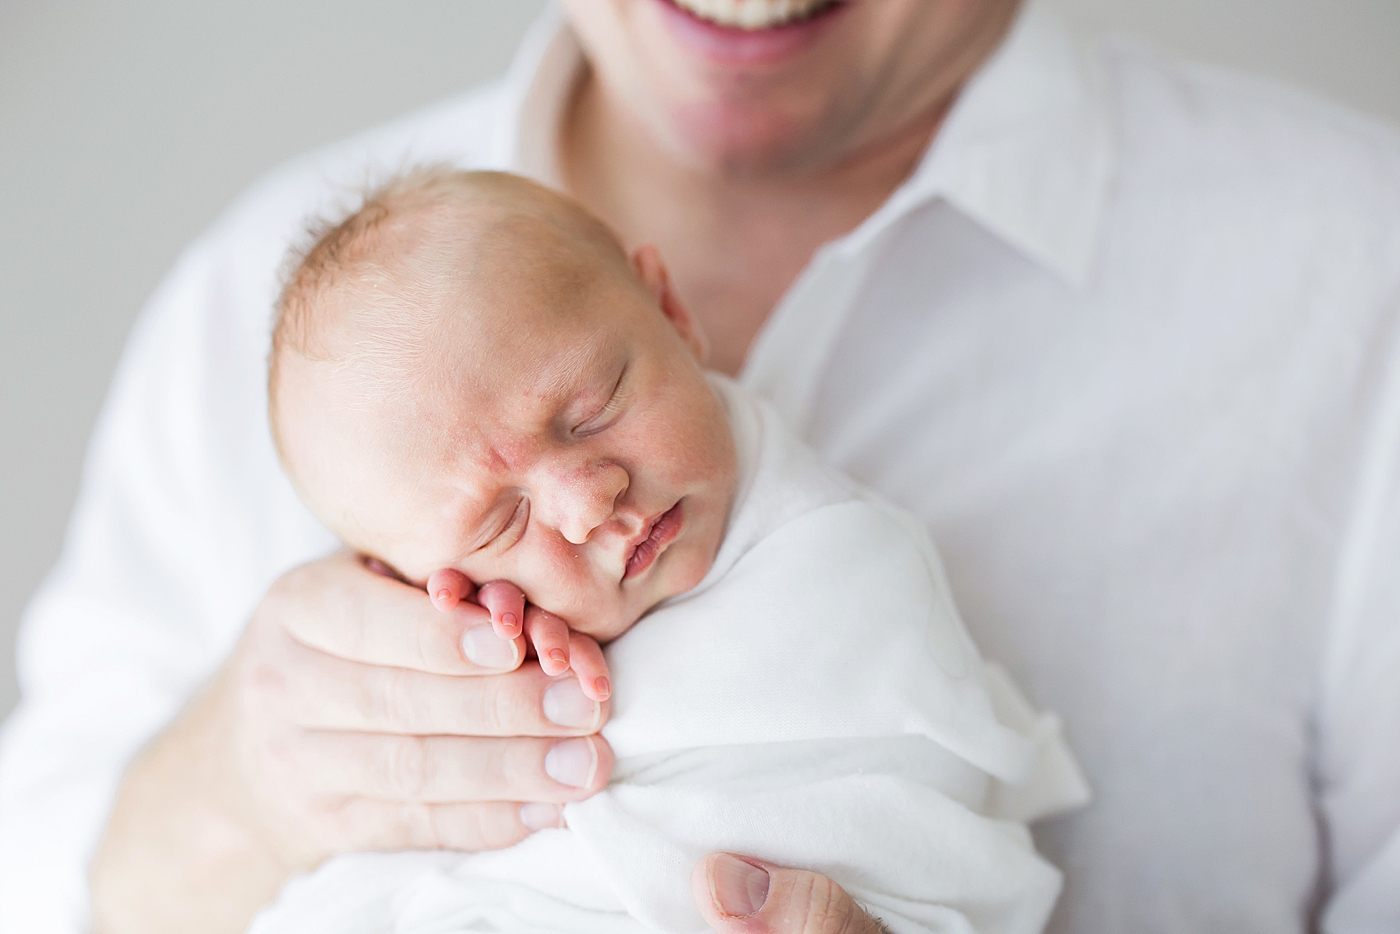 Father-son photos during studio newborn session in Houston. Photo by Fresh Light Photography.